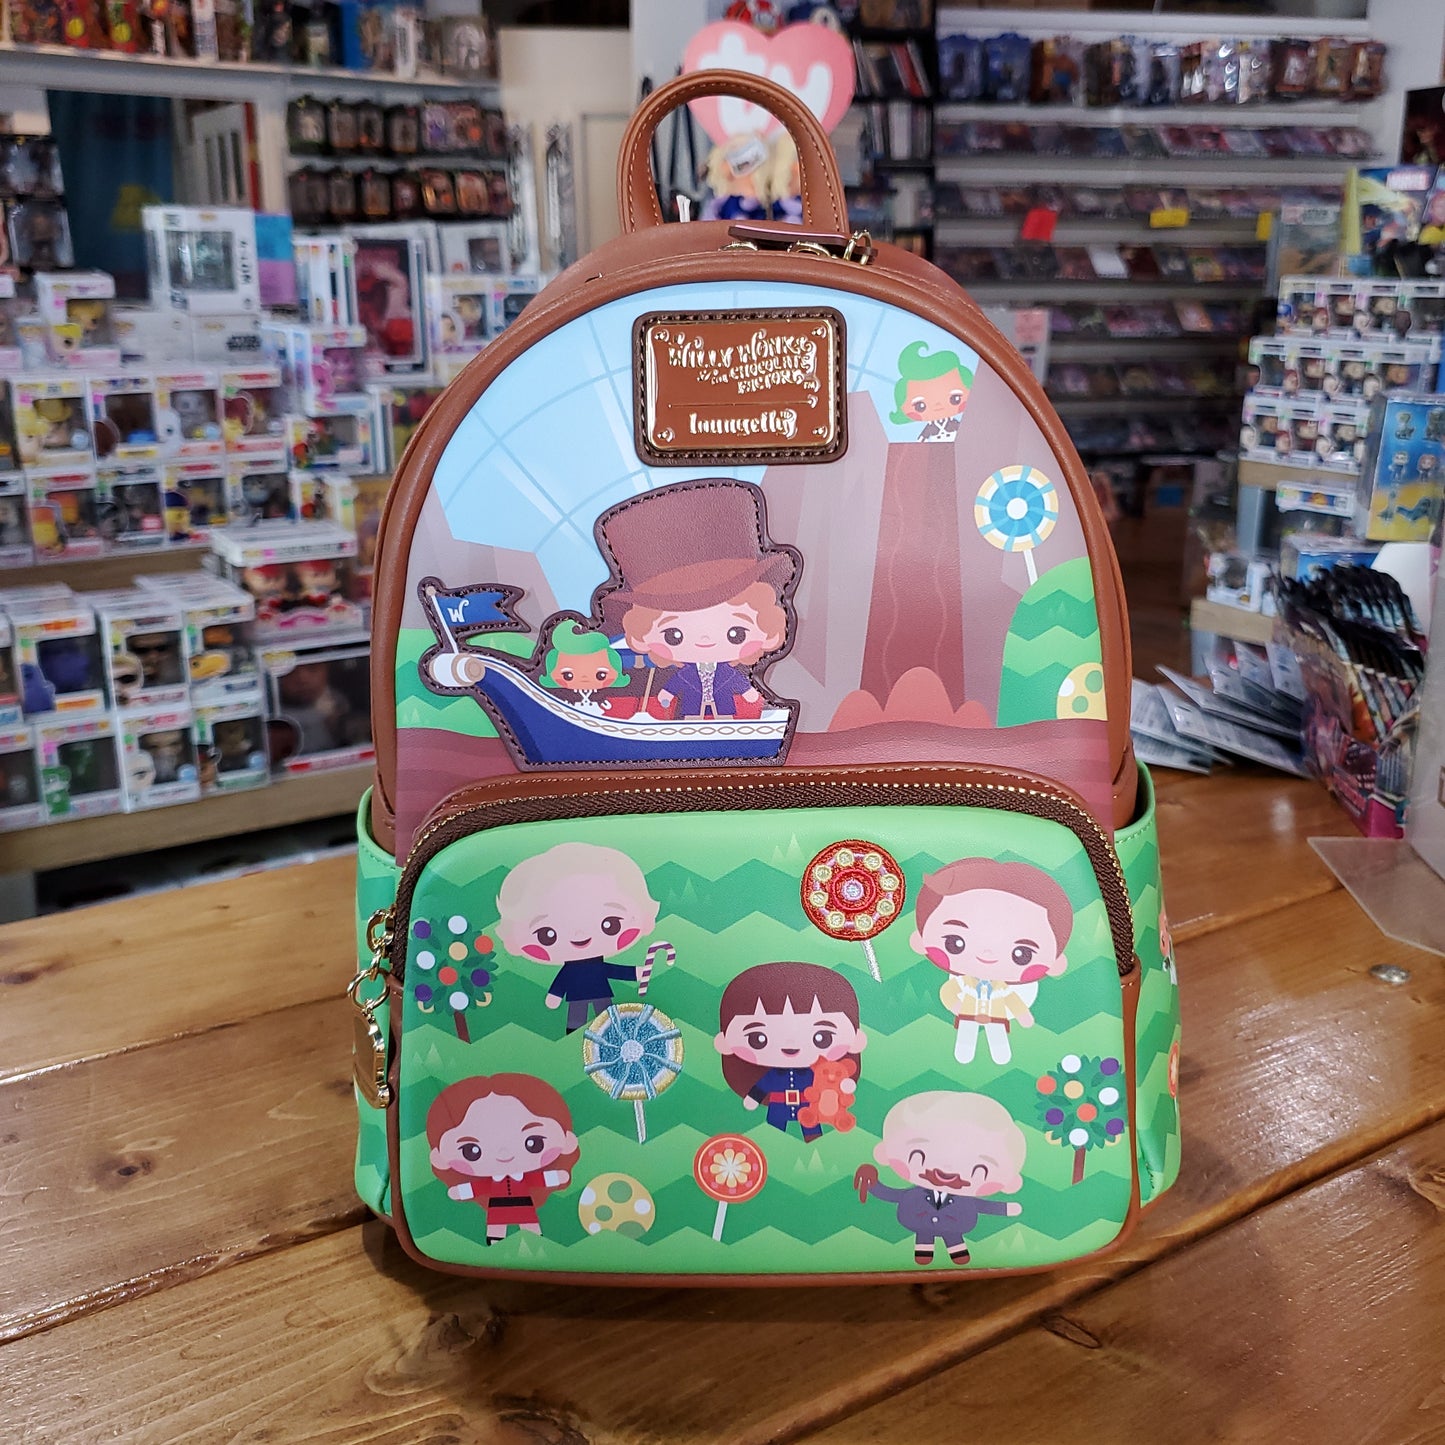 Willy Wonka and the Chocolate Factory Mini Backpack by Loungefly